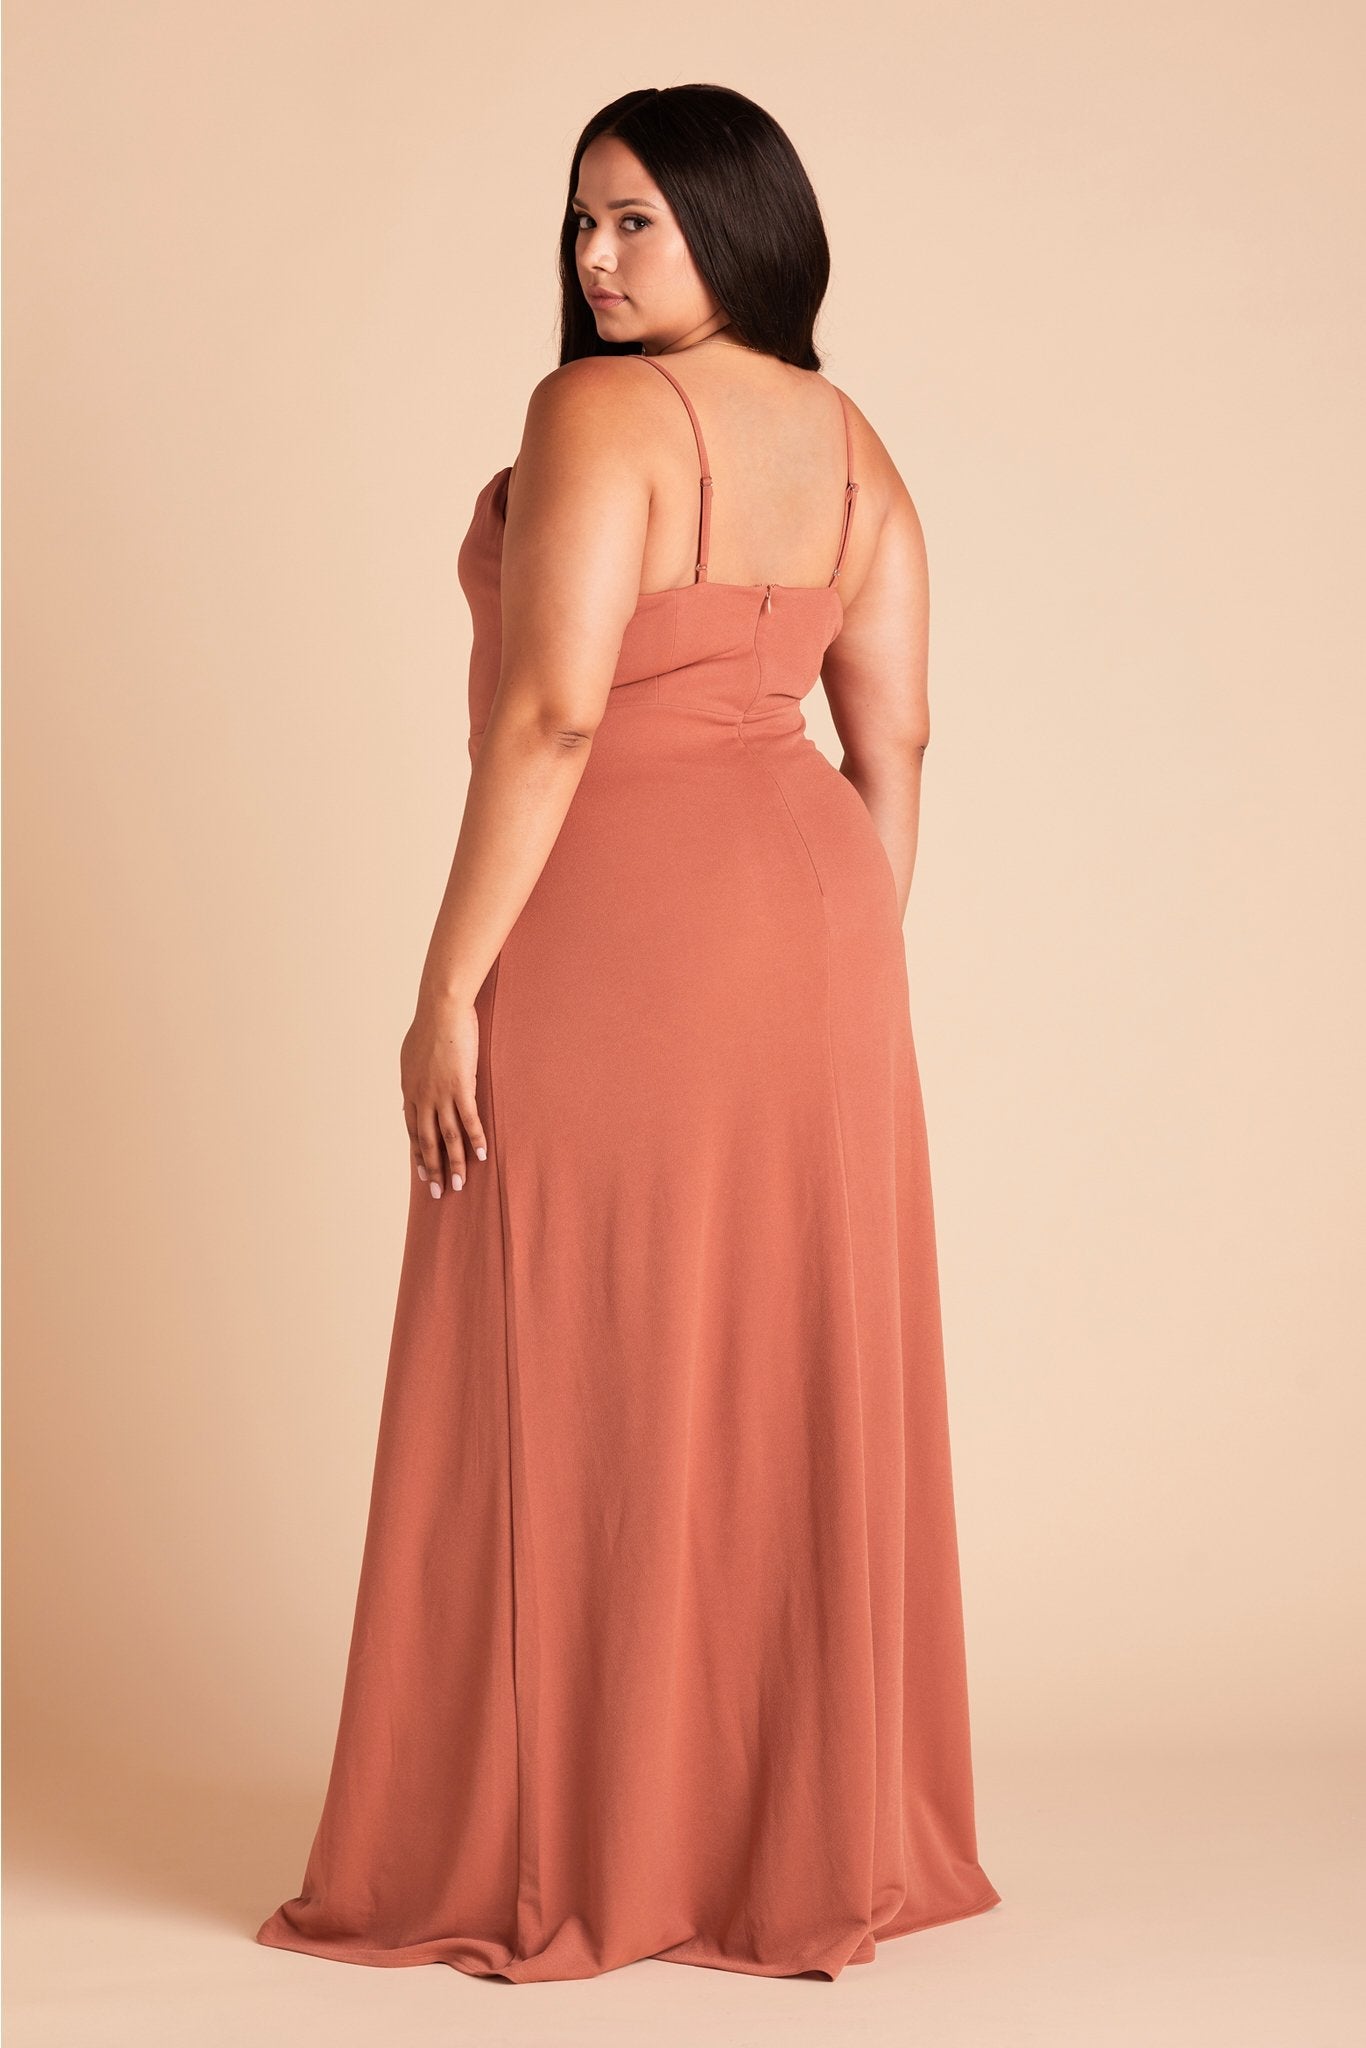 Ash plus size bridesmaid dress in terracotta crepe by Birdy Grey, side view